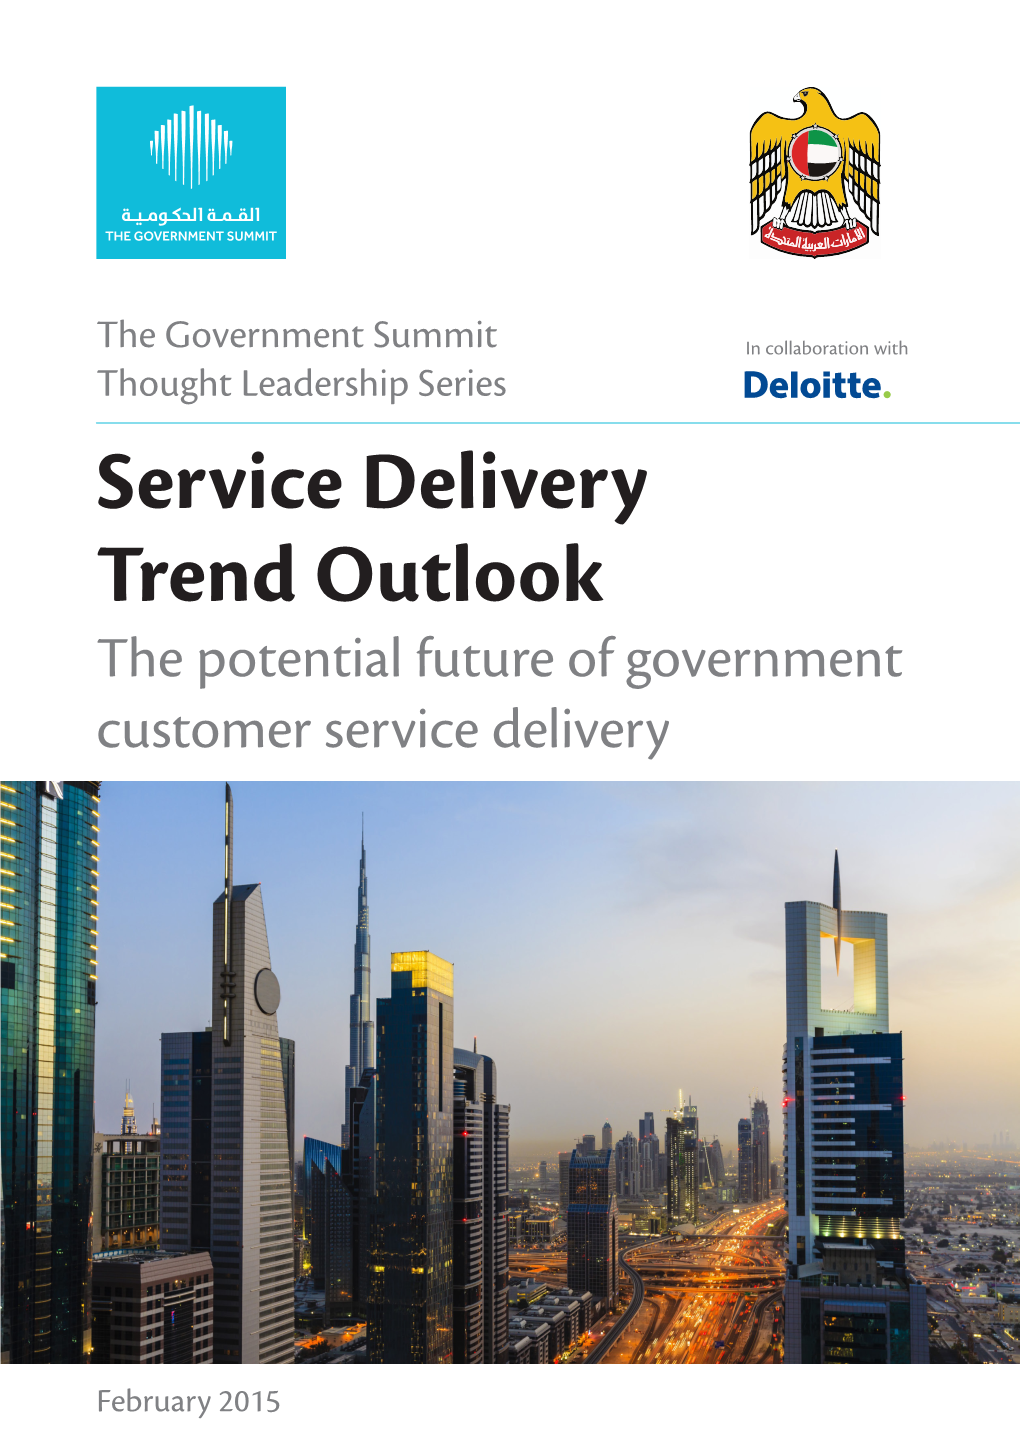 Service Delivery Trend Outlook the Potential Future of Government Customer Service Delivery